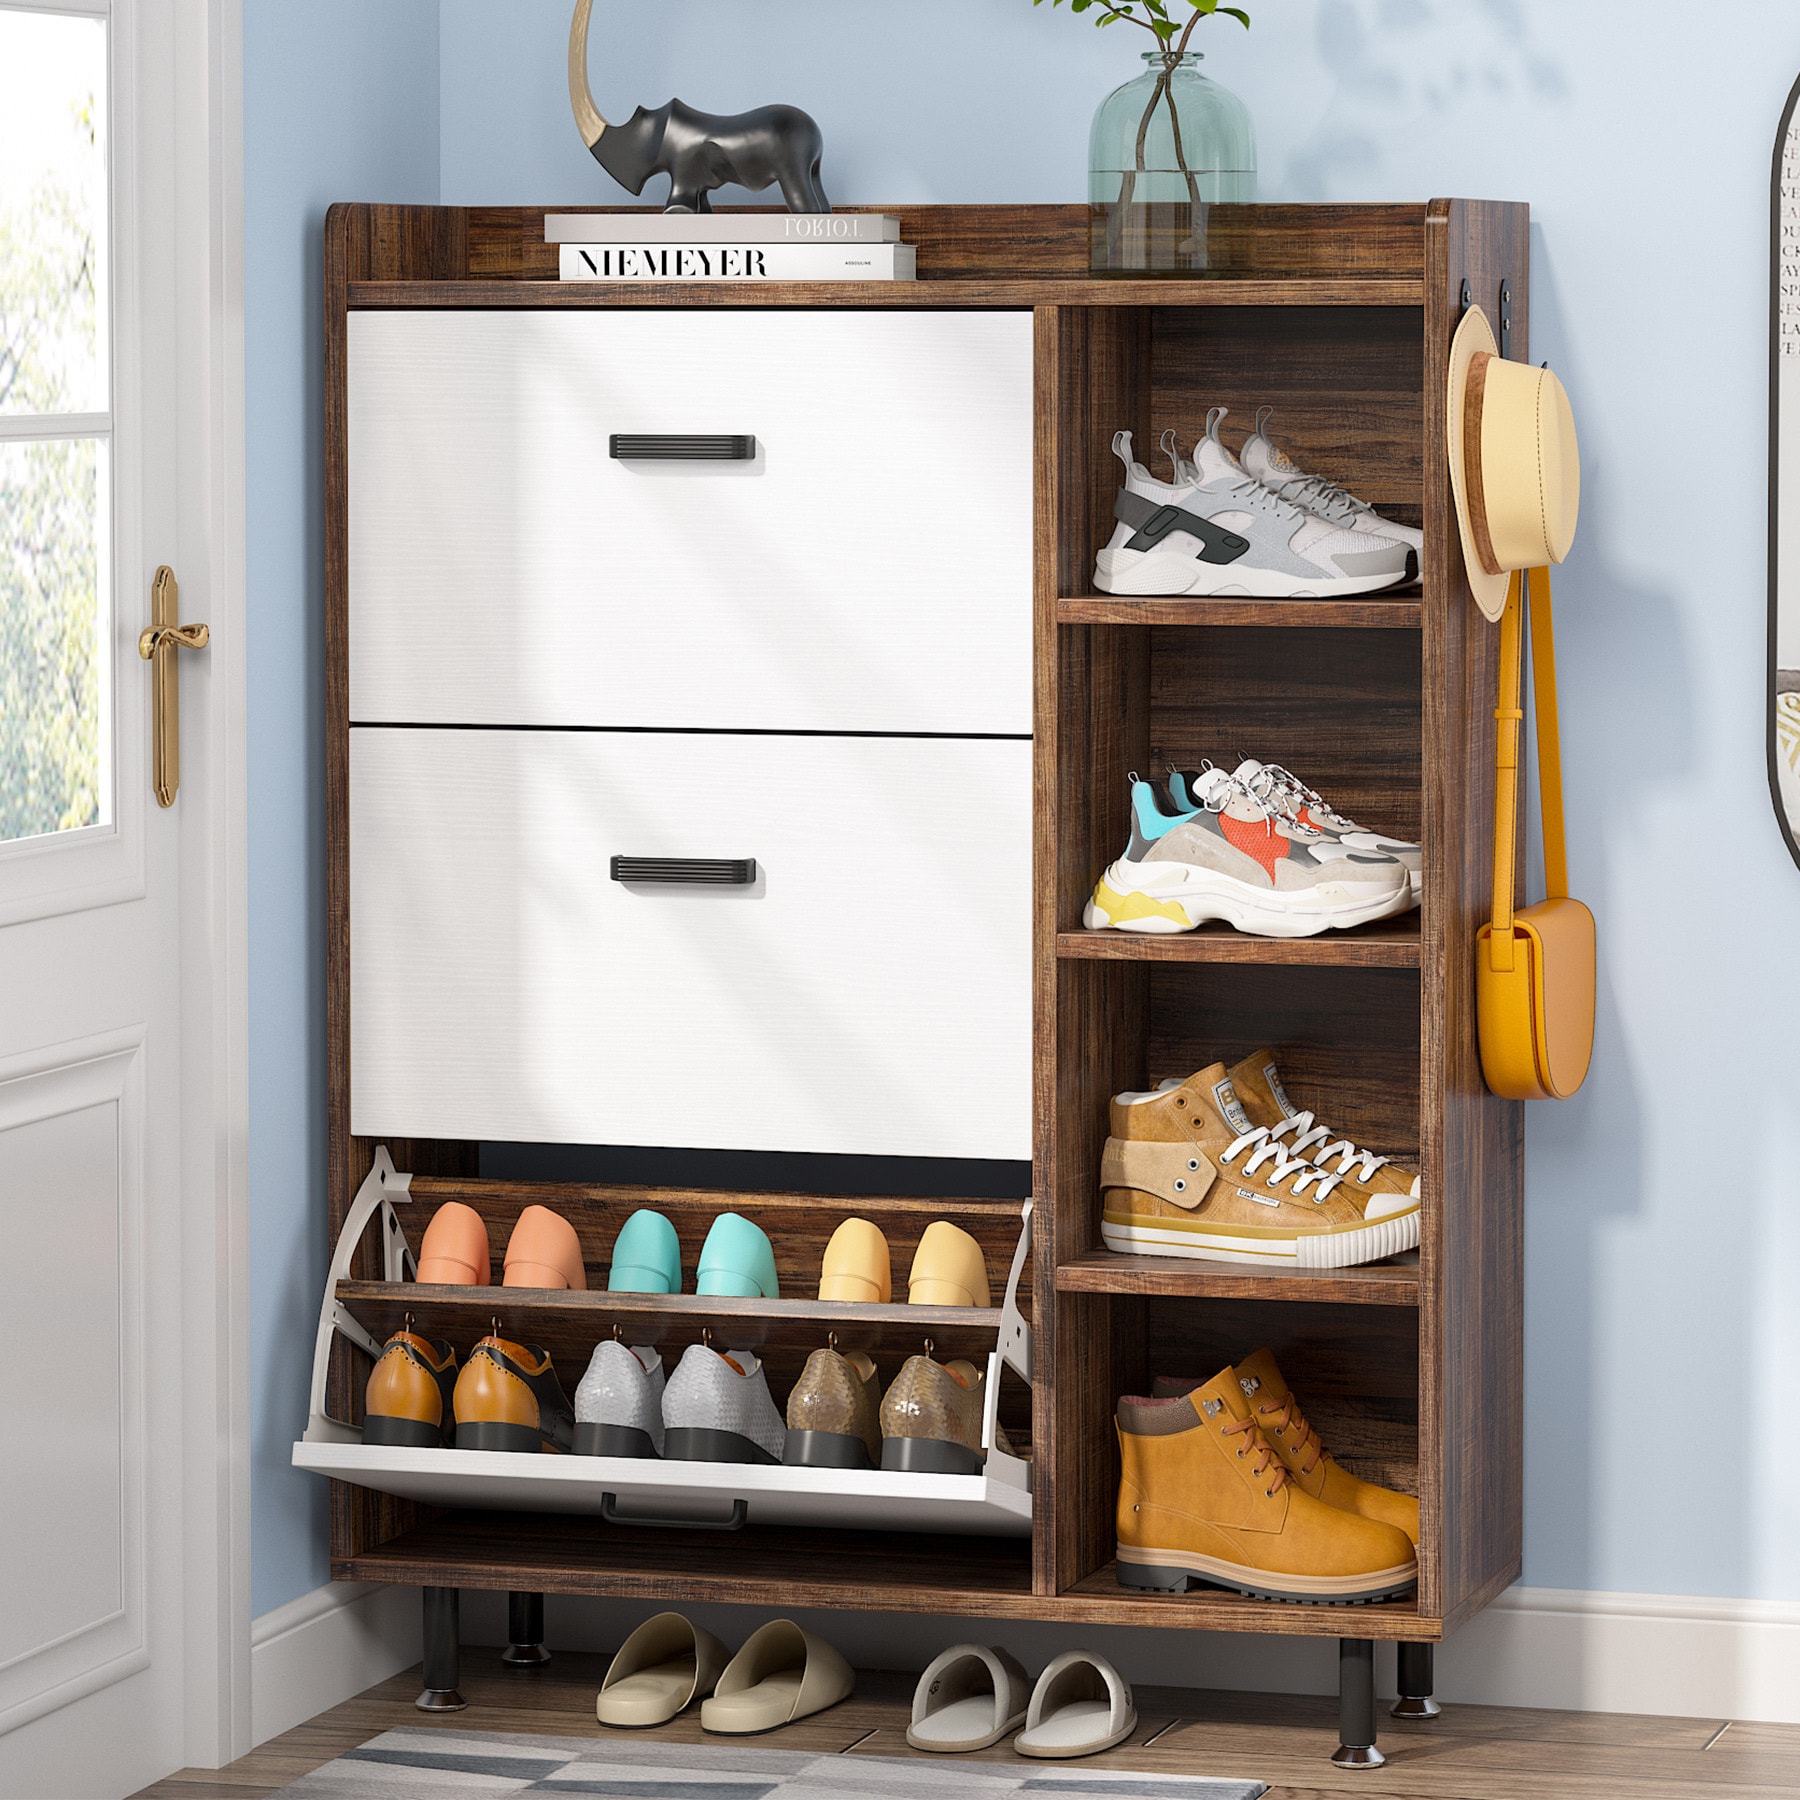 Buy Shoe Rack with 2 Shelves 50x27x40 cm Solid Oak Wood vidaXL Online |  Kogan.com. Our wooden shoe rack, with a simple yet timeless design and  rustic flair, will make a practical